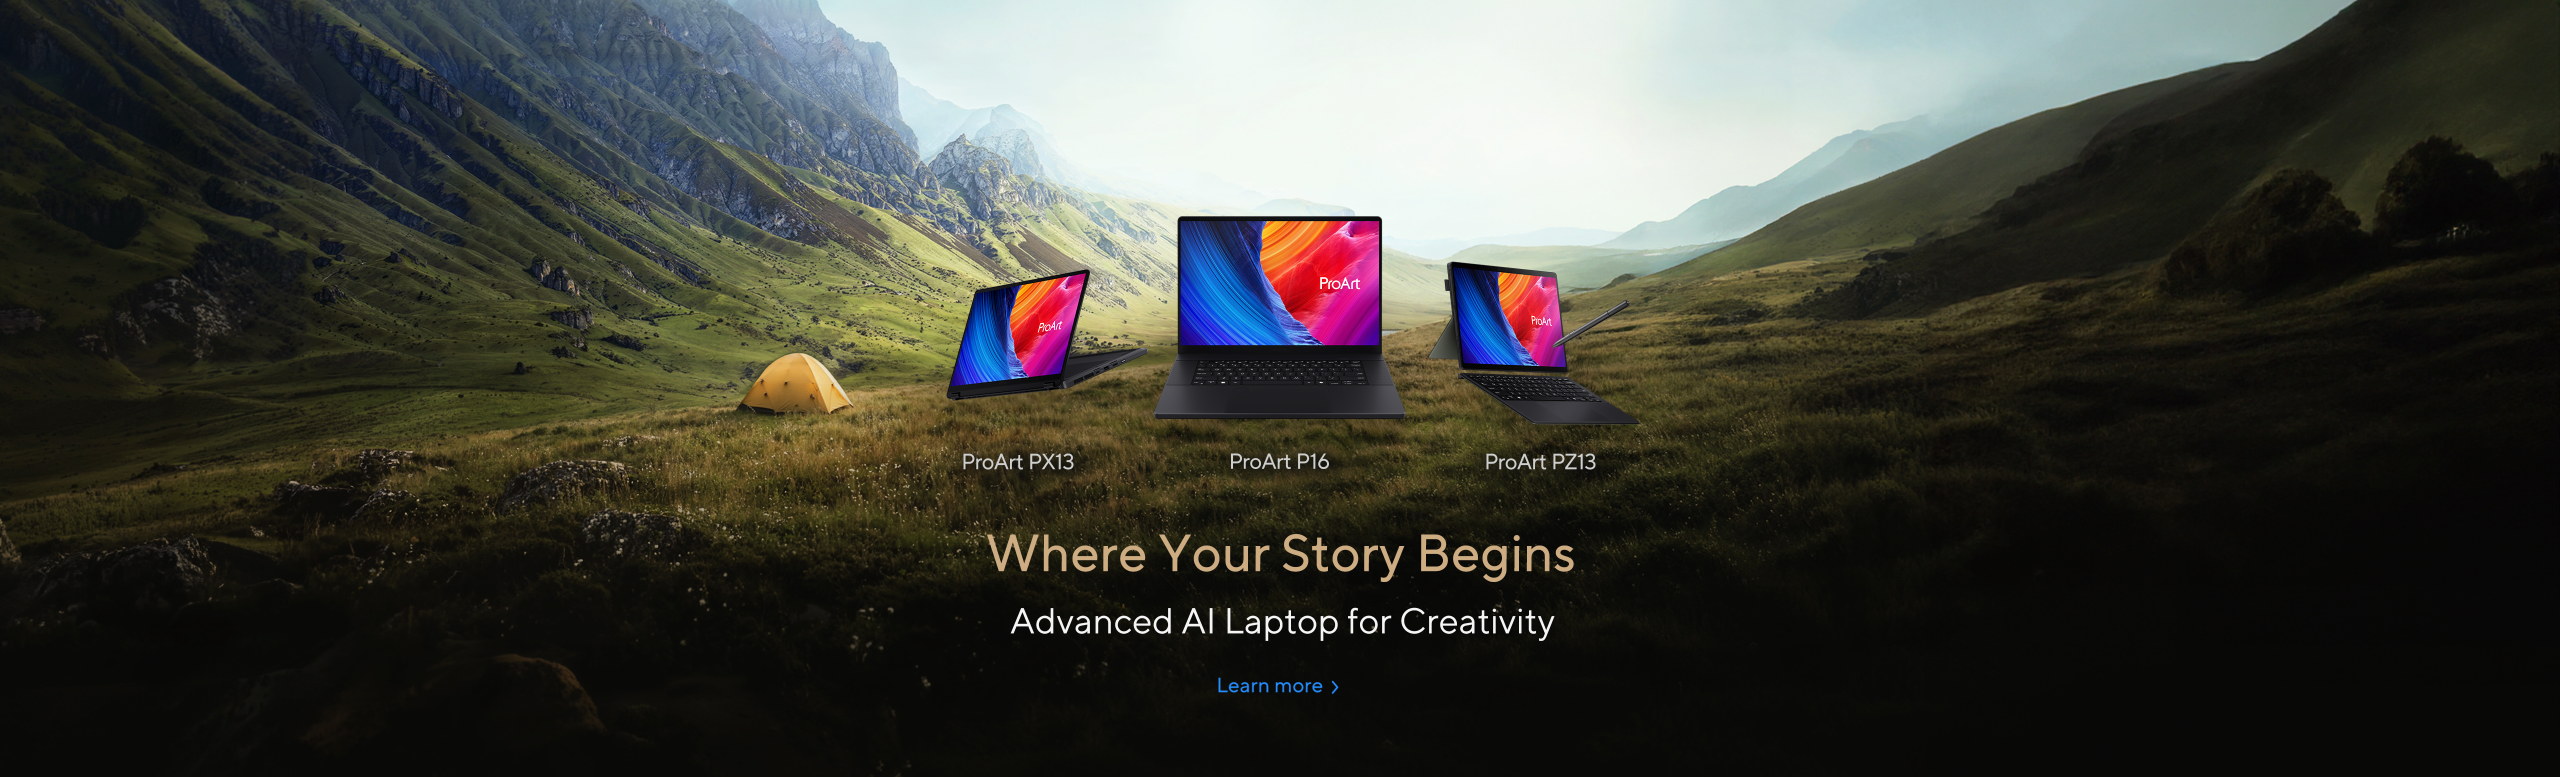 Learn more about ProArt laptop campaign